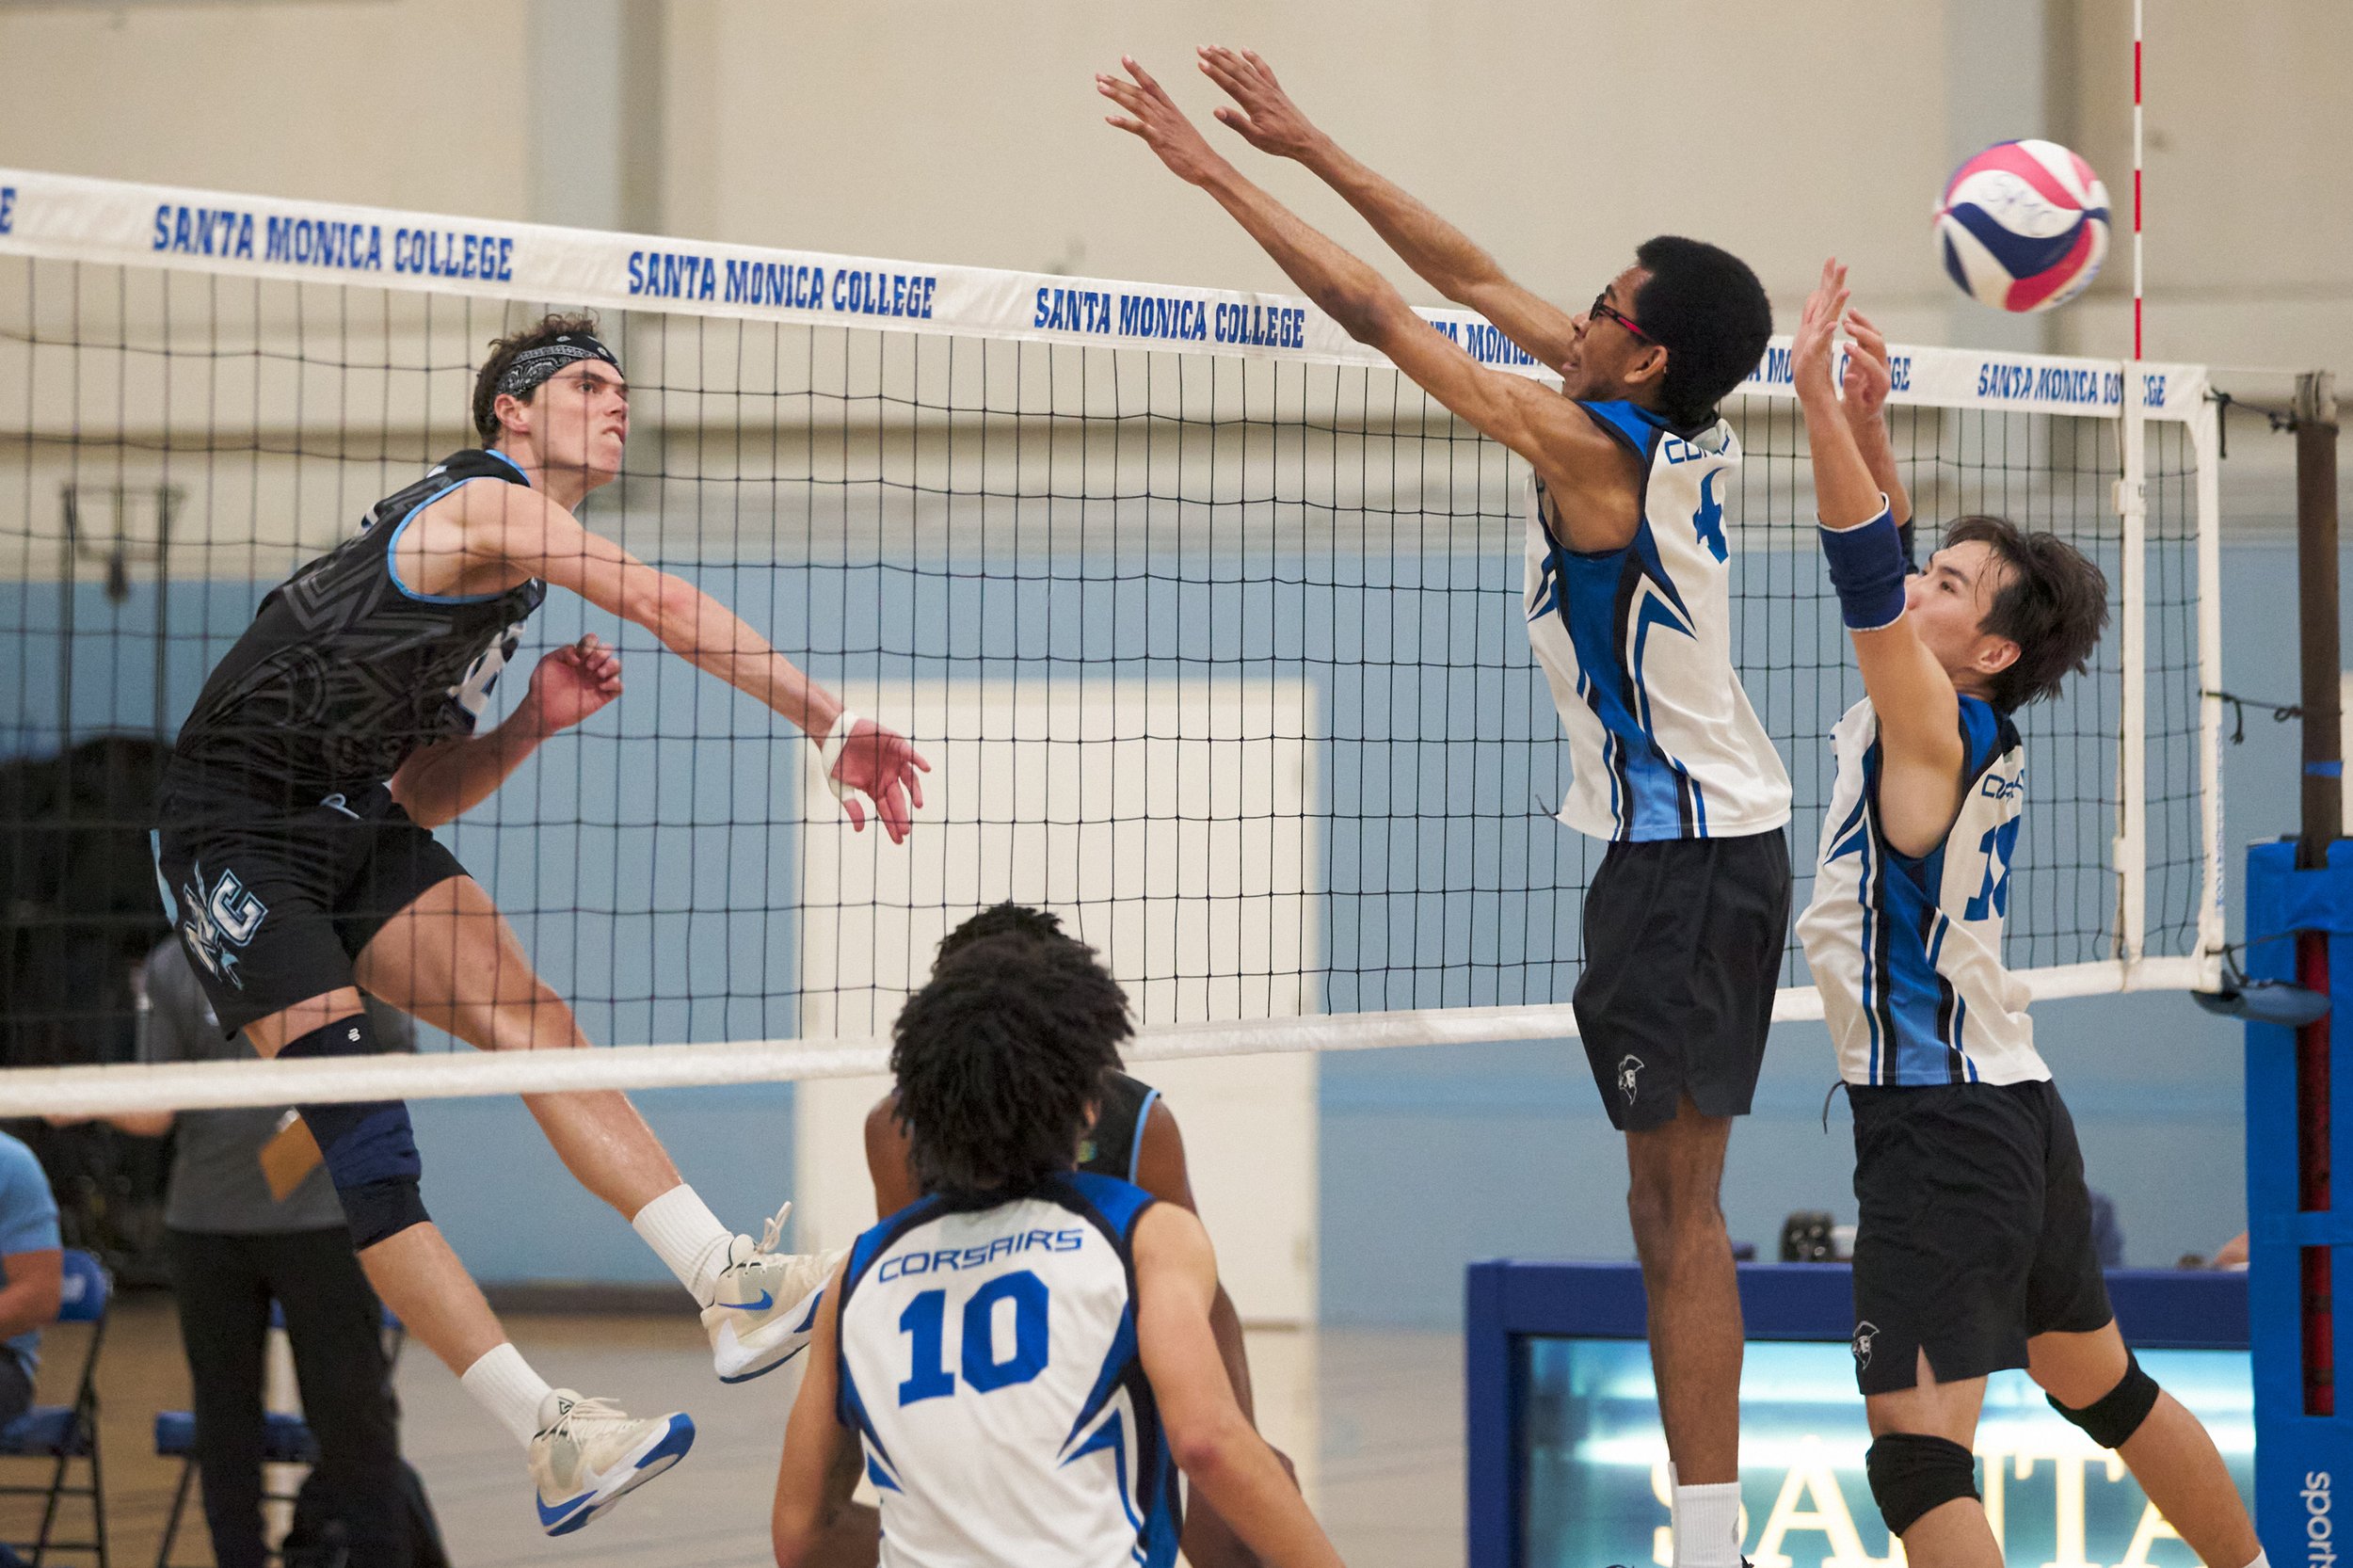  Moorpark College Raiders' Sean Schmutz hits the ball past Santa Monica College Corsairs' Beikwaw Yankey and Enkhtur Tserendavaa during the men's volleyball match on Wednesday, April 12, 2023, at Corsair Gym in Santa Monica, Calif. The Corsairs lost 